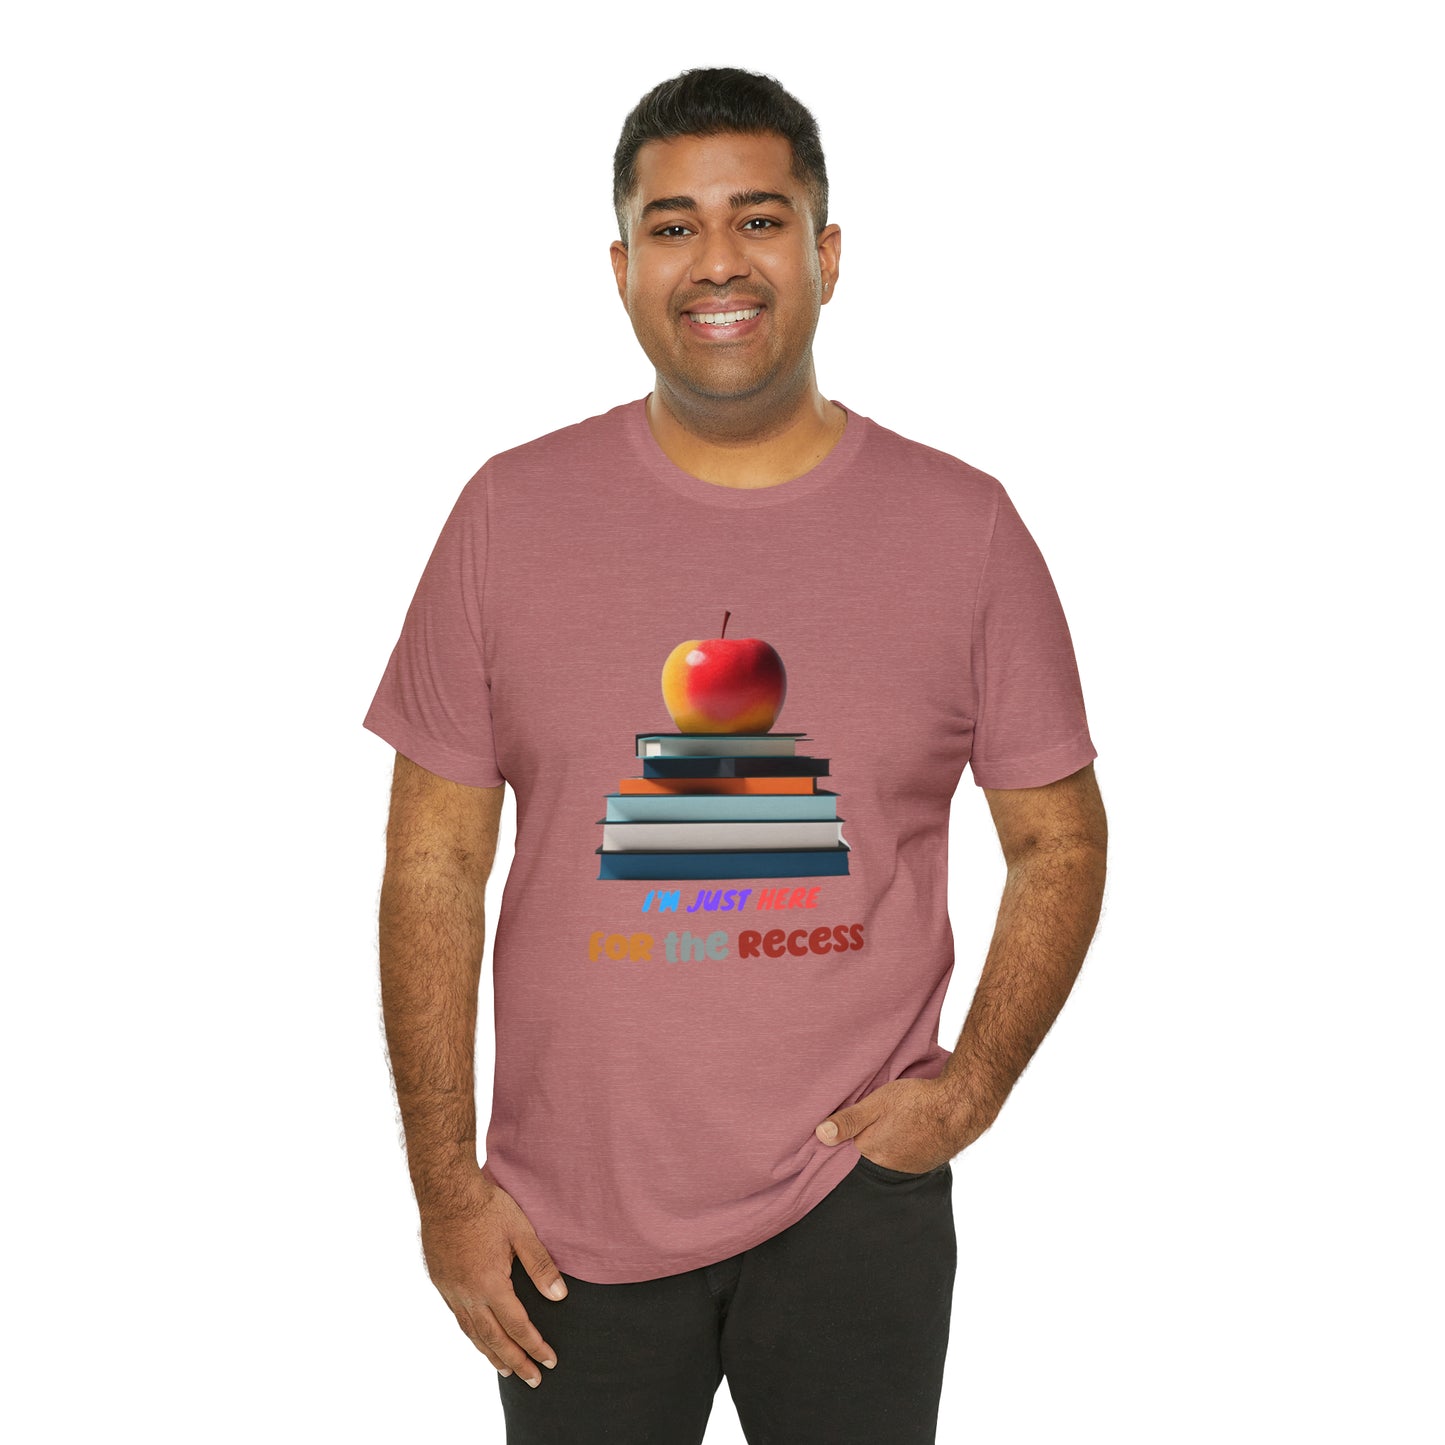 Back to school shirt funny for student, I am just here for the recess, T151